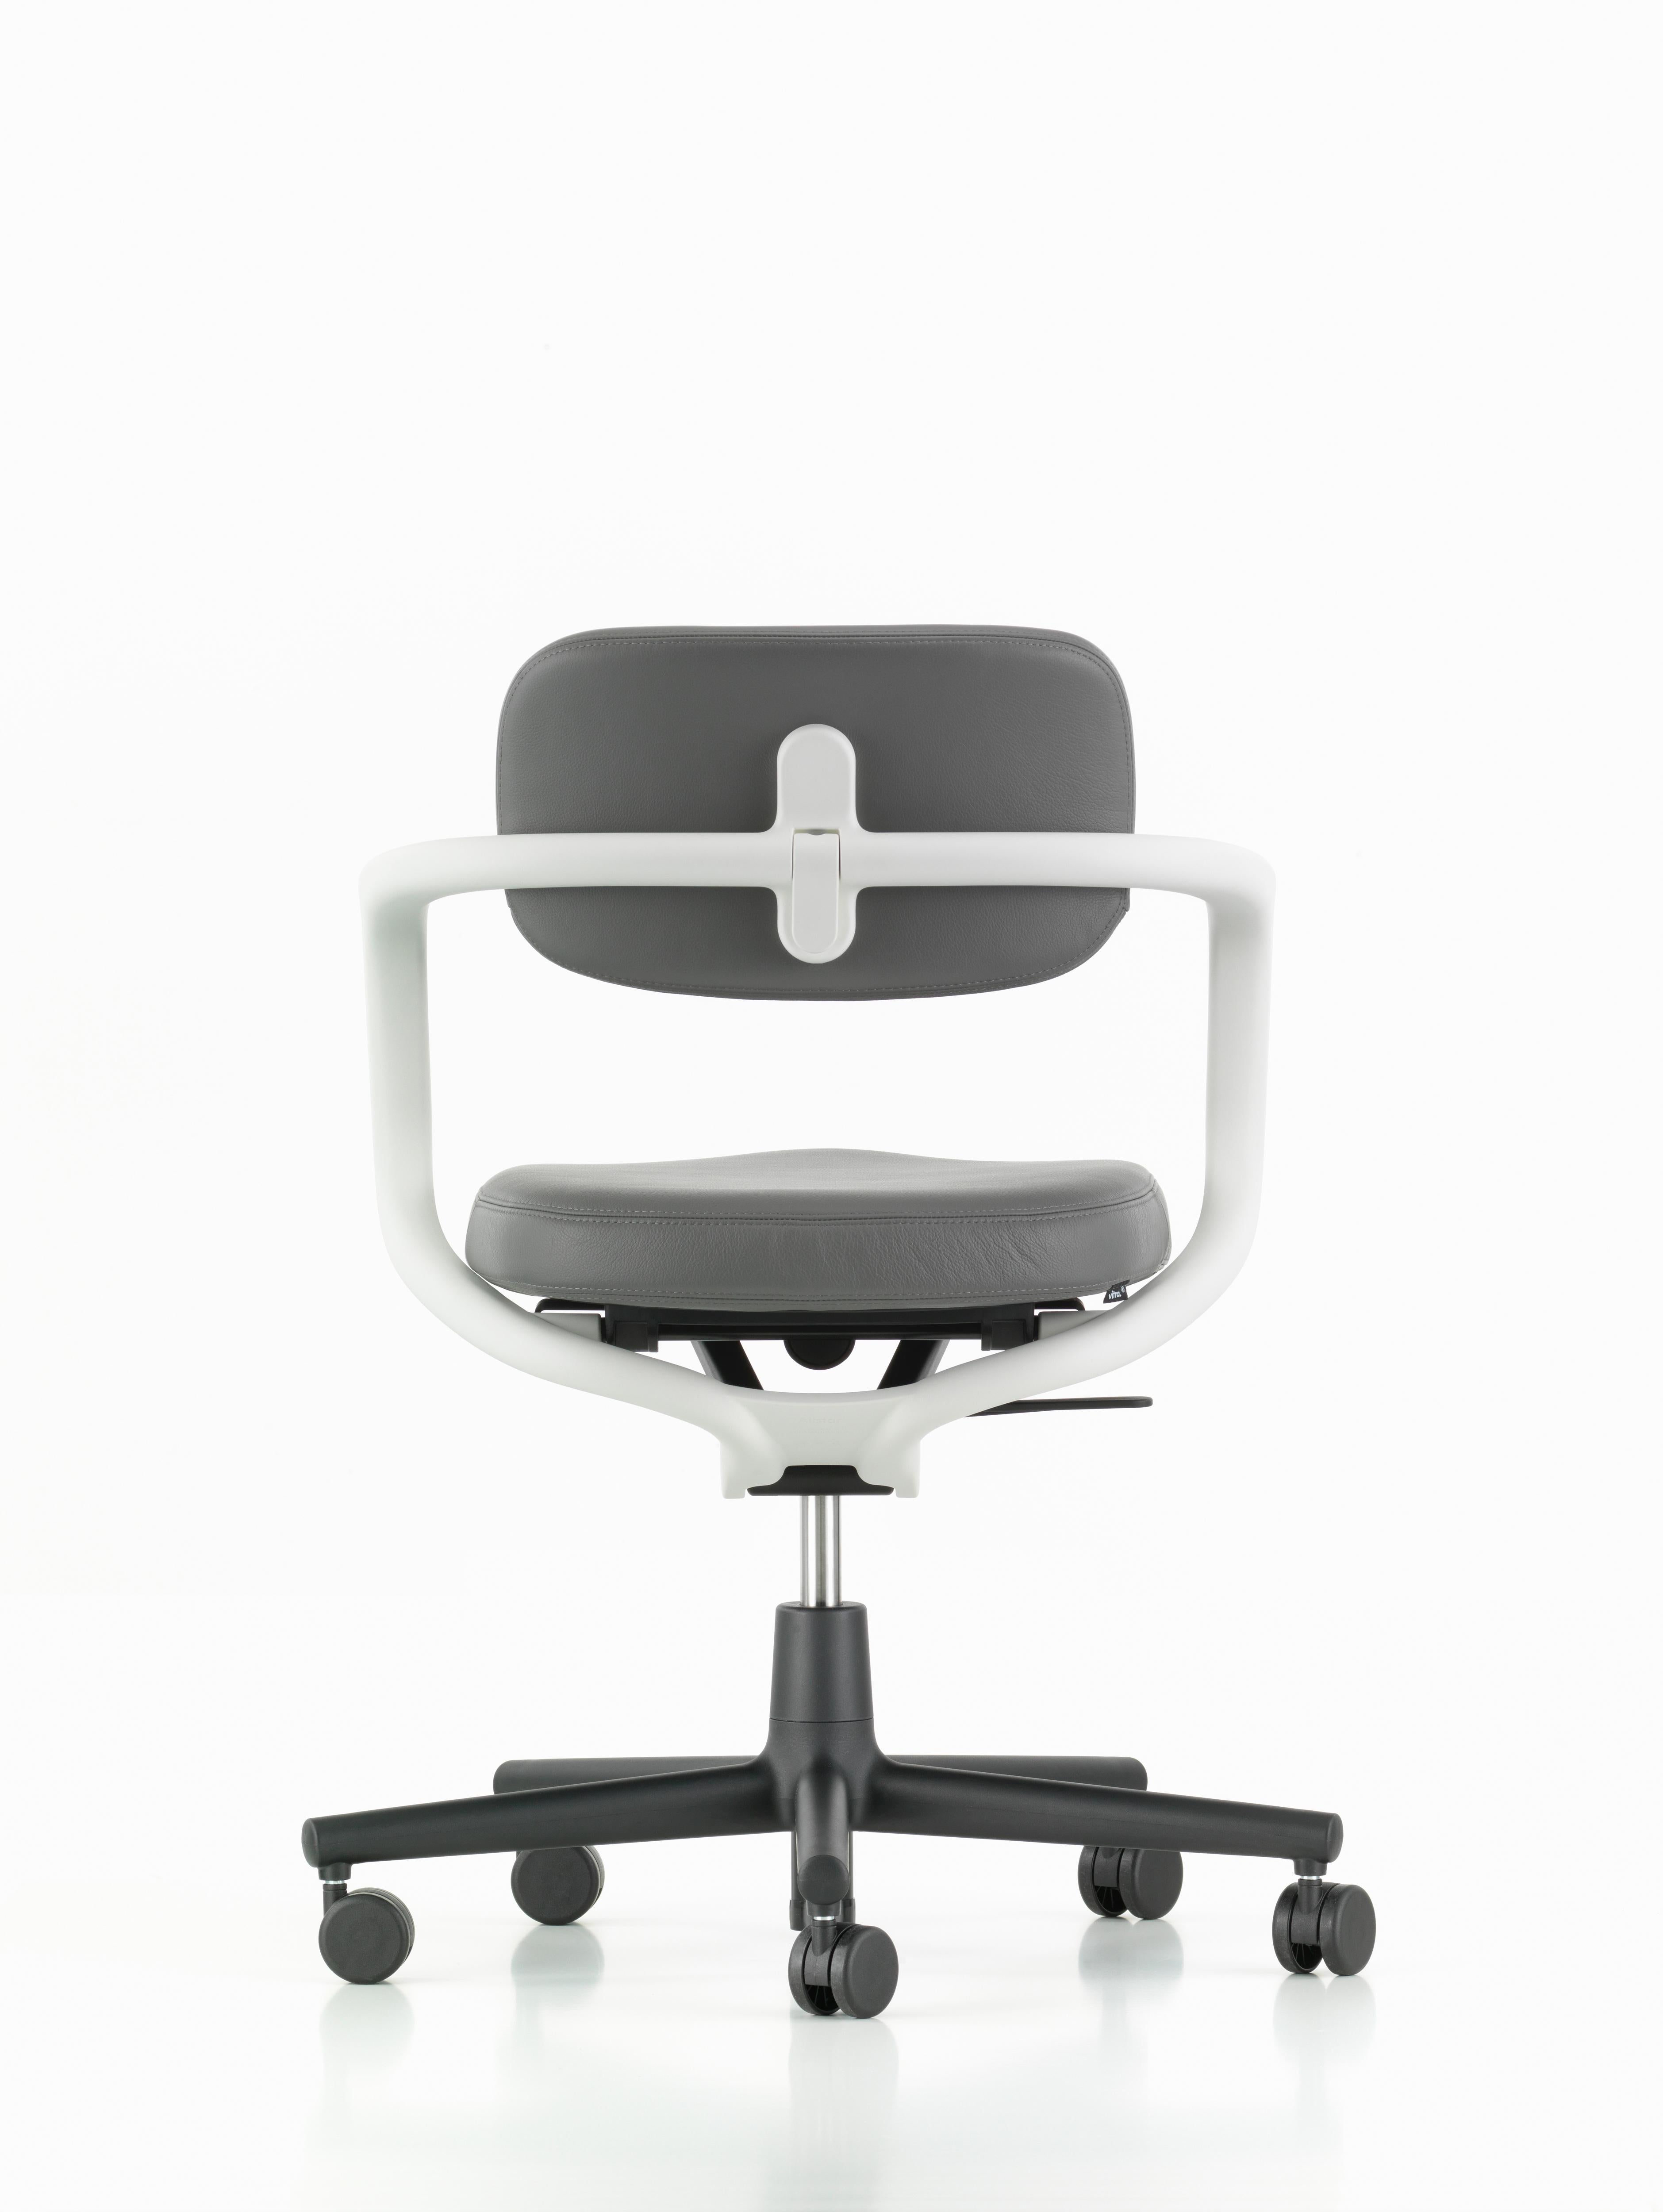 Swiss Vitra Allstar Chair in Dim Grey Leather by Konstantin Grcic For Sale